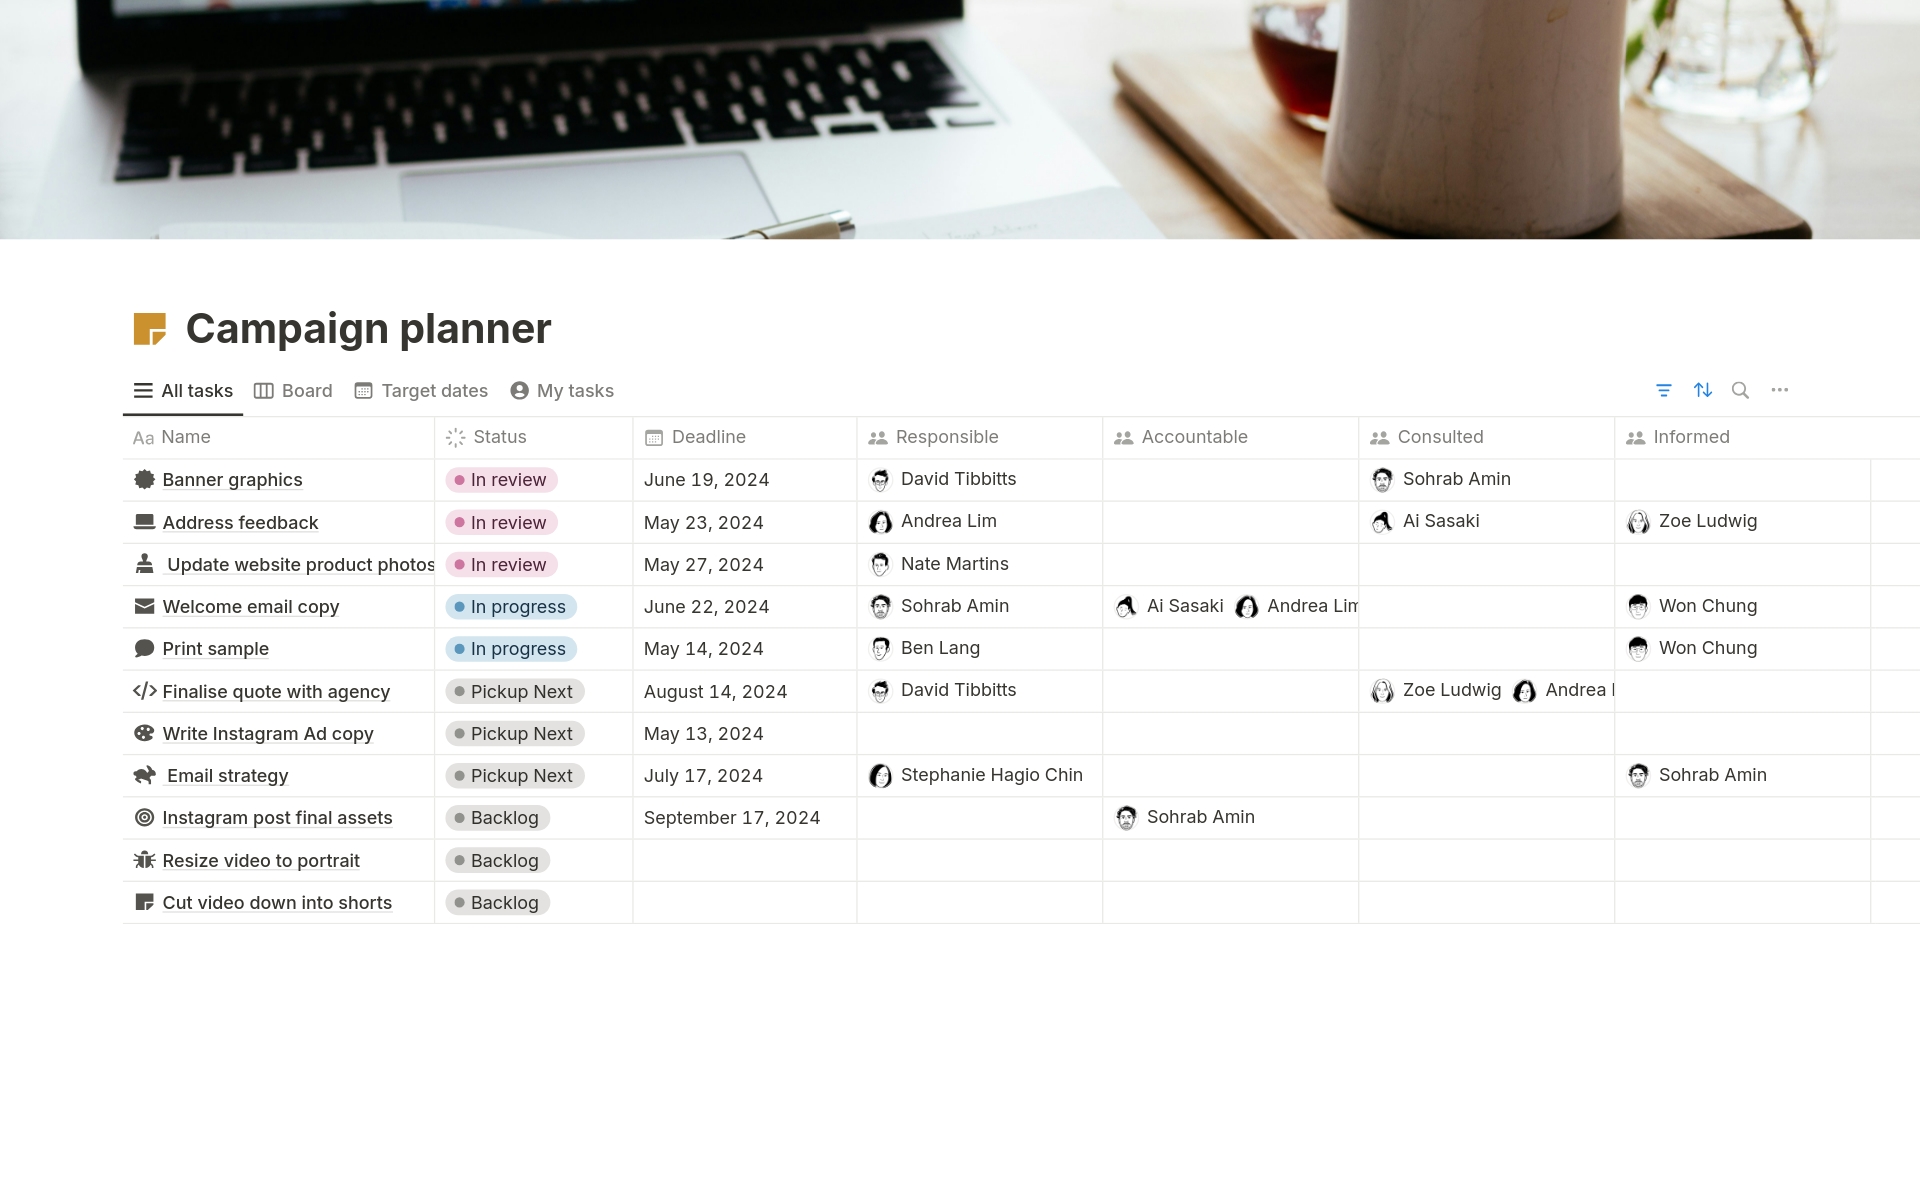 Streamline your marketing efforts with this comprehensive planner, designed to manage campaigns efficiently using the RACI framework.